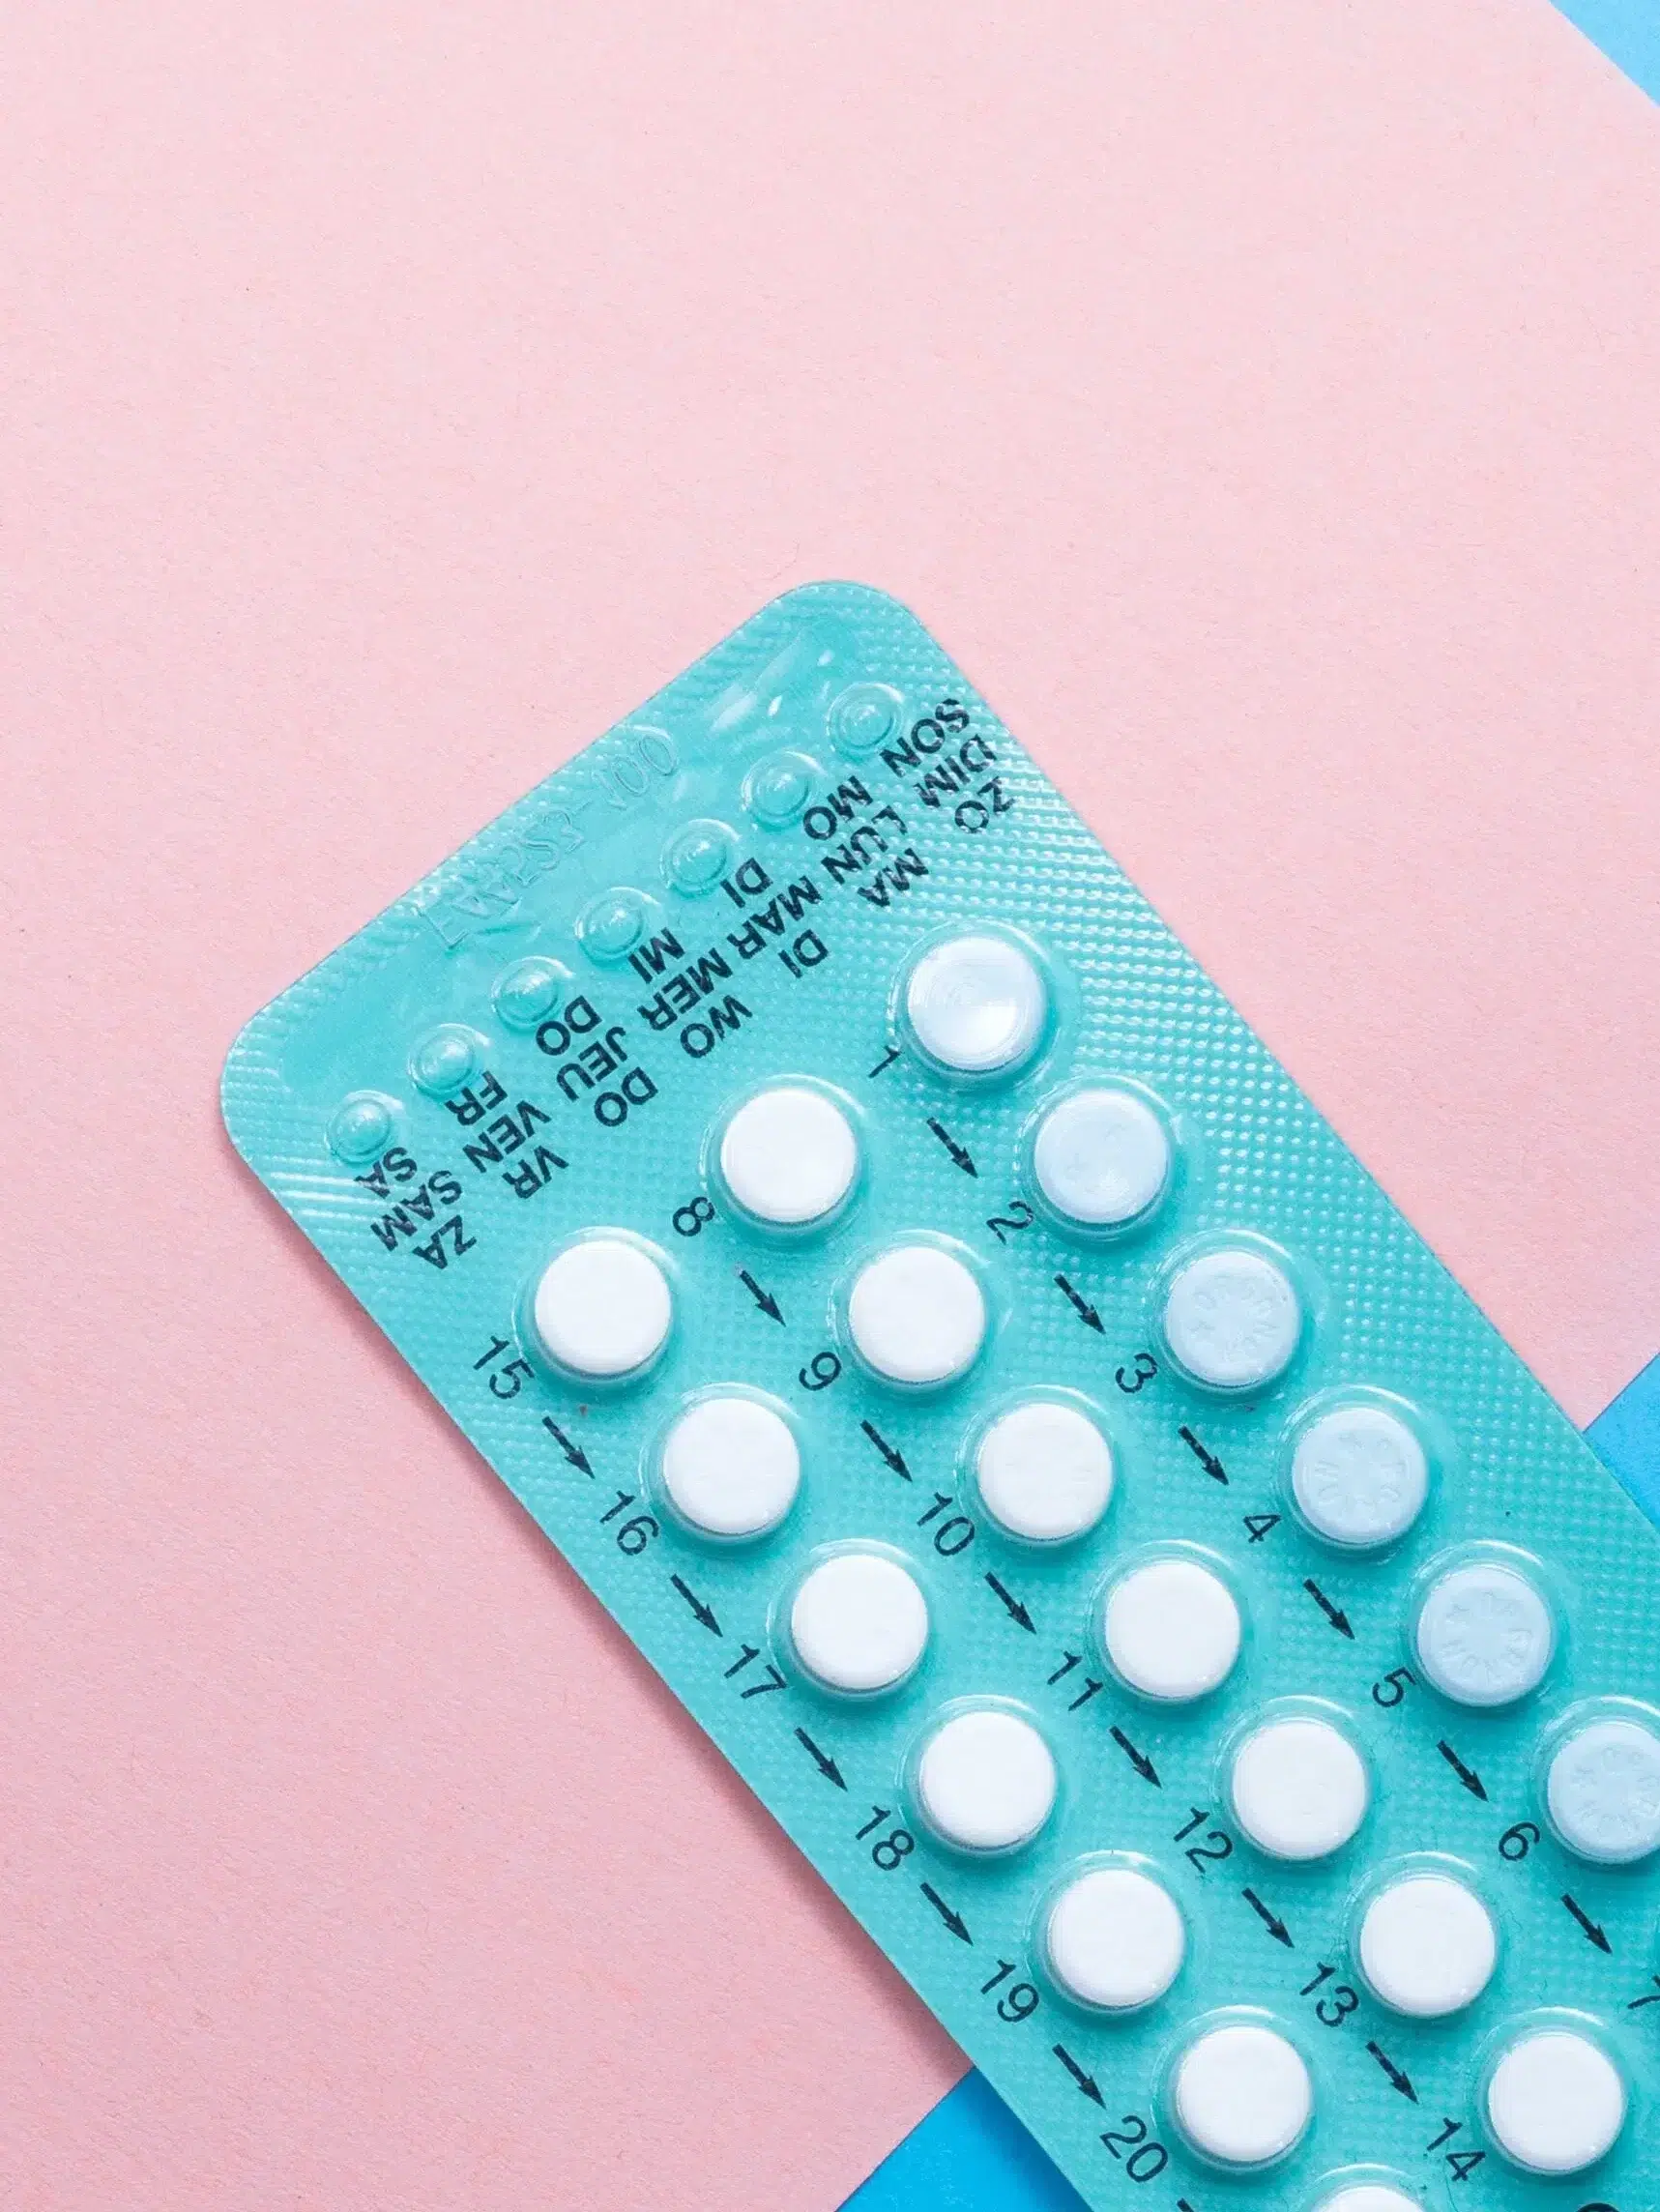 A pack of birth control pills from Wisp